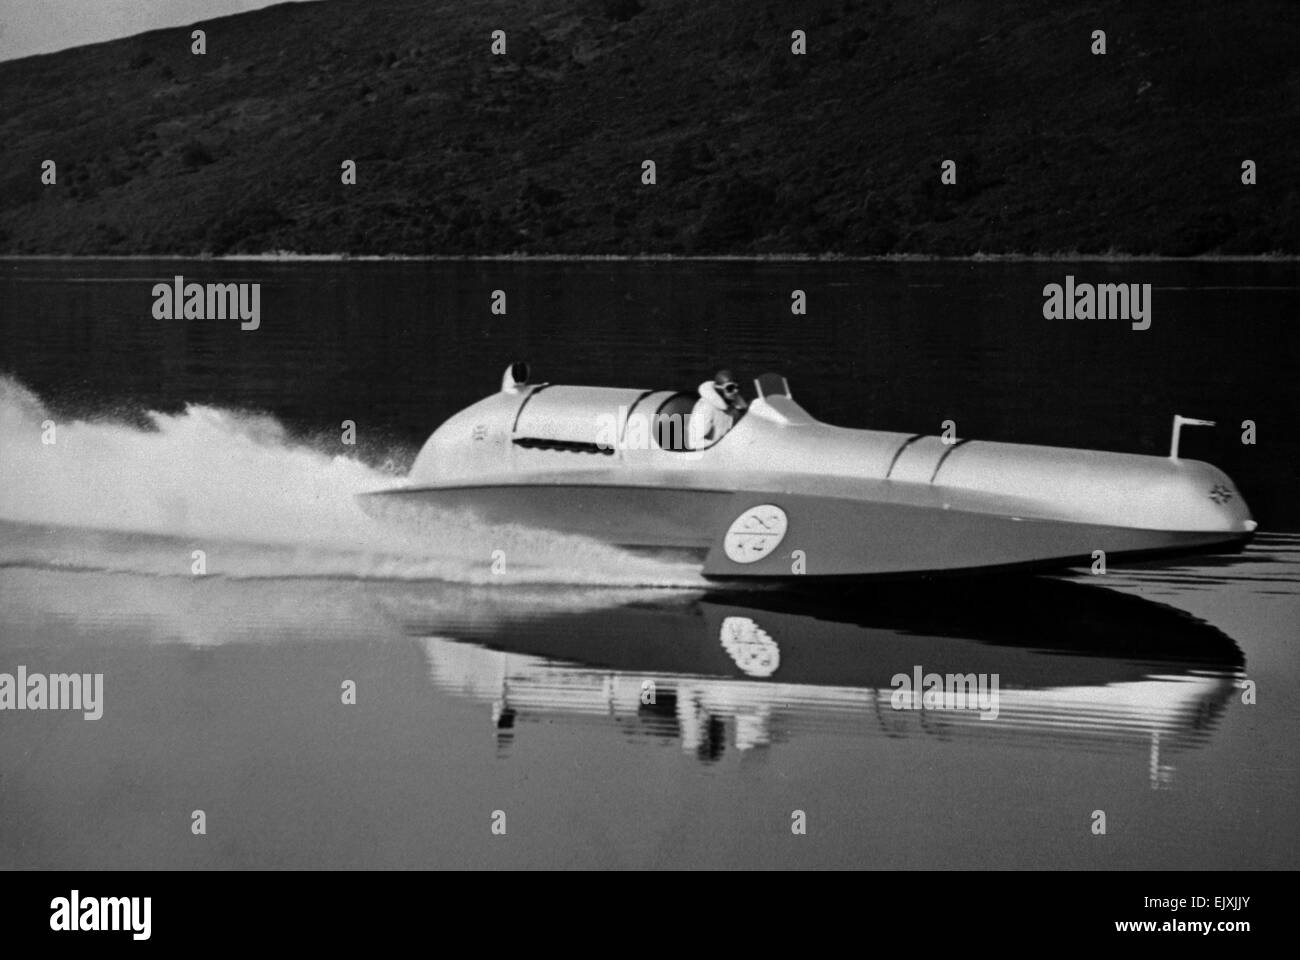 AJAXNETPHOTO. - 1939 (?). LAKE CONISTON, ENGLAND. - SPEED RECORD - SIR MALCOLM CAMPBELL'S THREE POINT HYDROPLANE BLUEBIRD K4 SET A WATER SPEED RECORD ON 19TH AUGUST, 1939 OF 141.74 MPH. THE BOAT WAS BUILT BY VOSPER LTD AND POWERED BY A ROLLS ROYCE R ENGINE. K4 WAS MODIFIED POST WAR AND FITTED WITH A DE HAVILAND GOBLIN II TURBO JET ENGINE AND NICKNAMED 'THE SLIPPER'. NO NEW RECORDS WERE MADE WITH THE BOAT DURING SPEED TRIALS IN 1947 AND 1948. PHOTO:VT COLLECTION/AJAX REF:VT368 Stock Photo